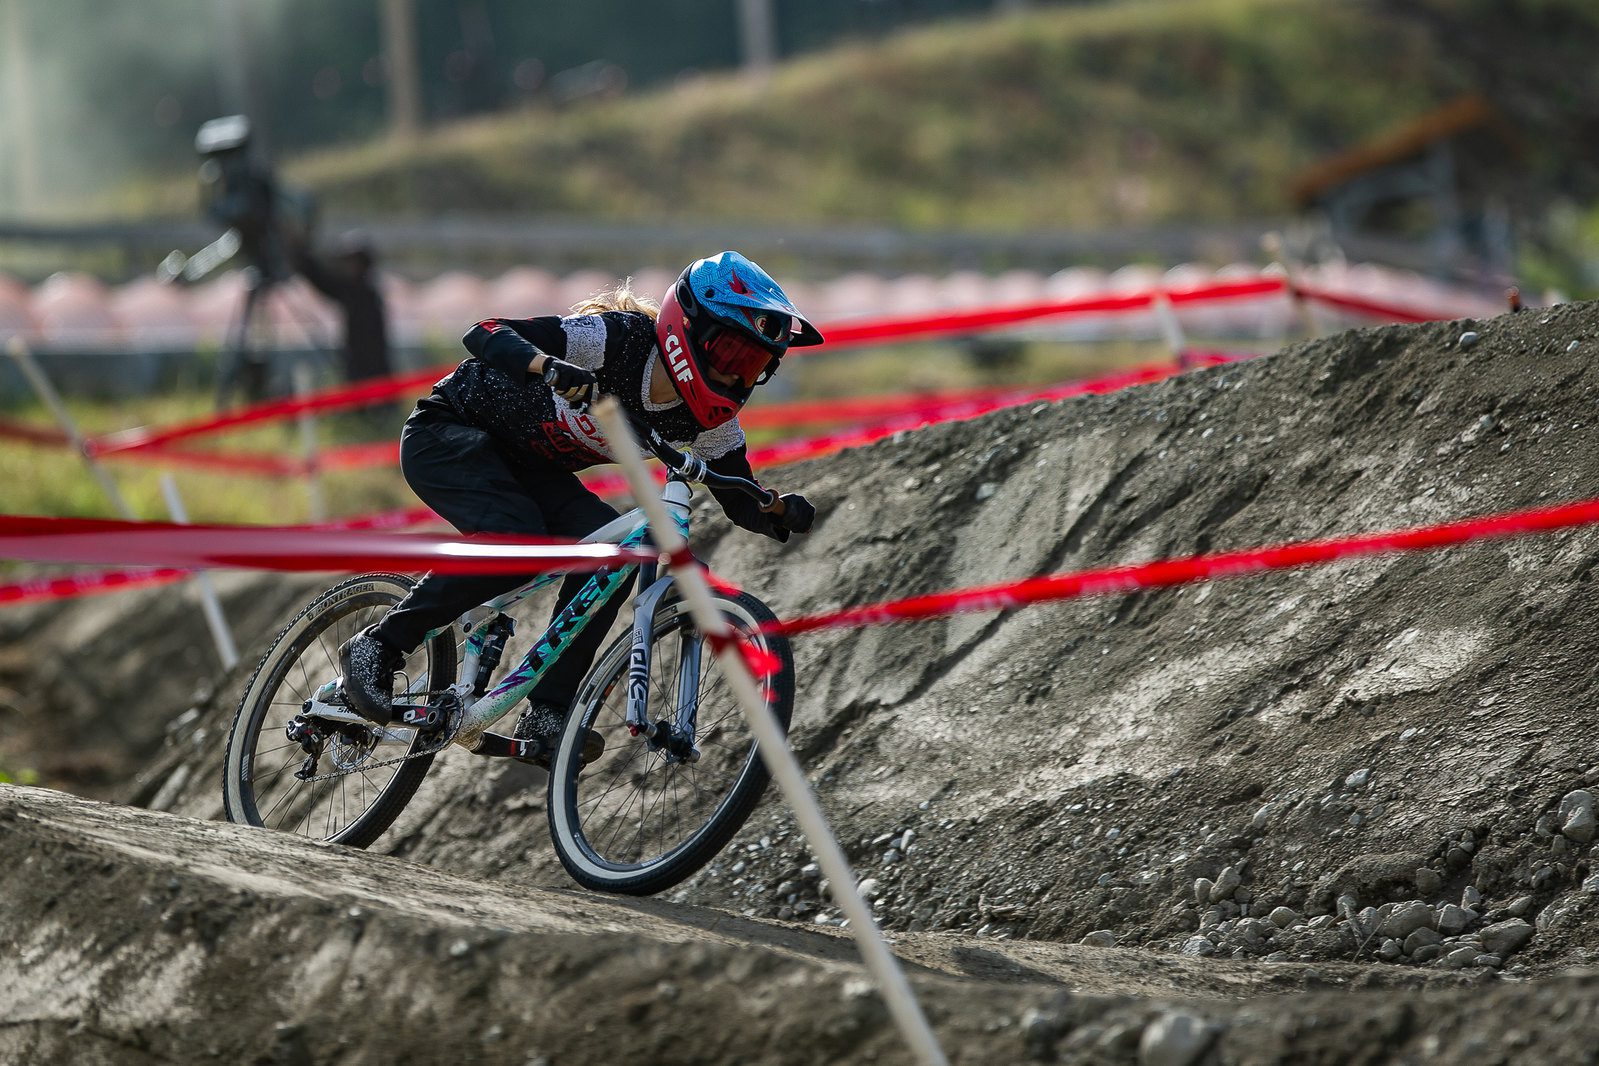 Crankworx Whistler crowns first ever woman's Speed and Style winner ...